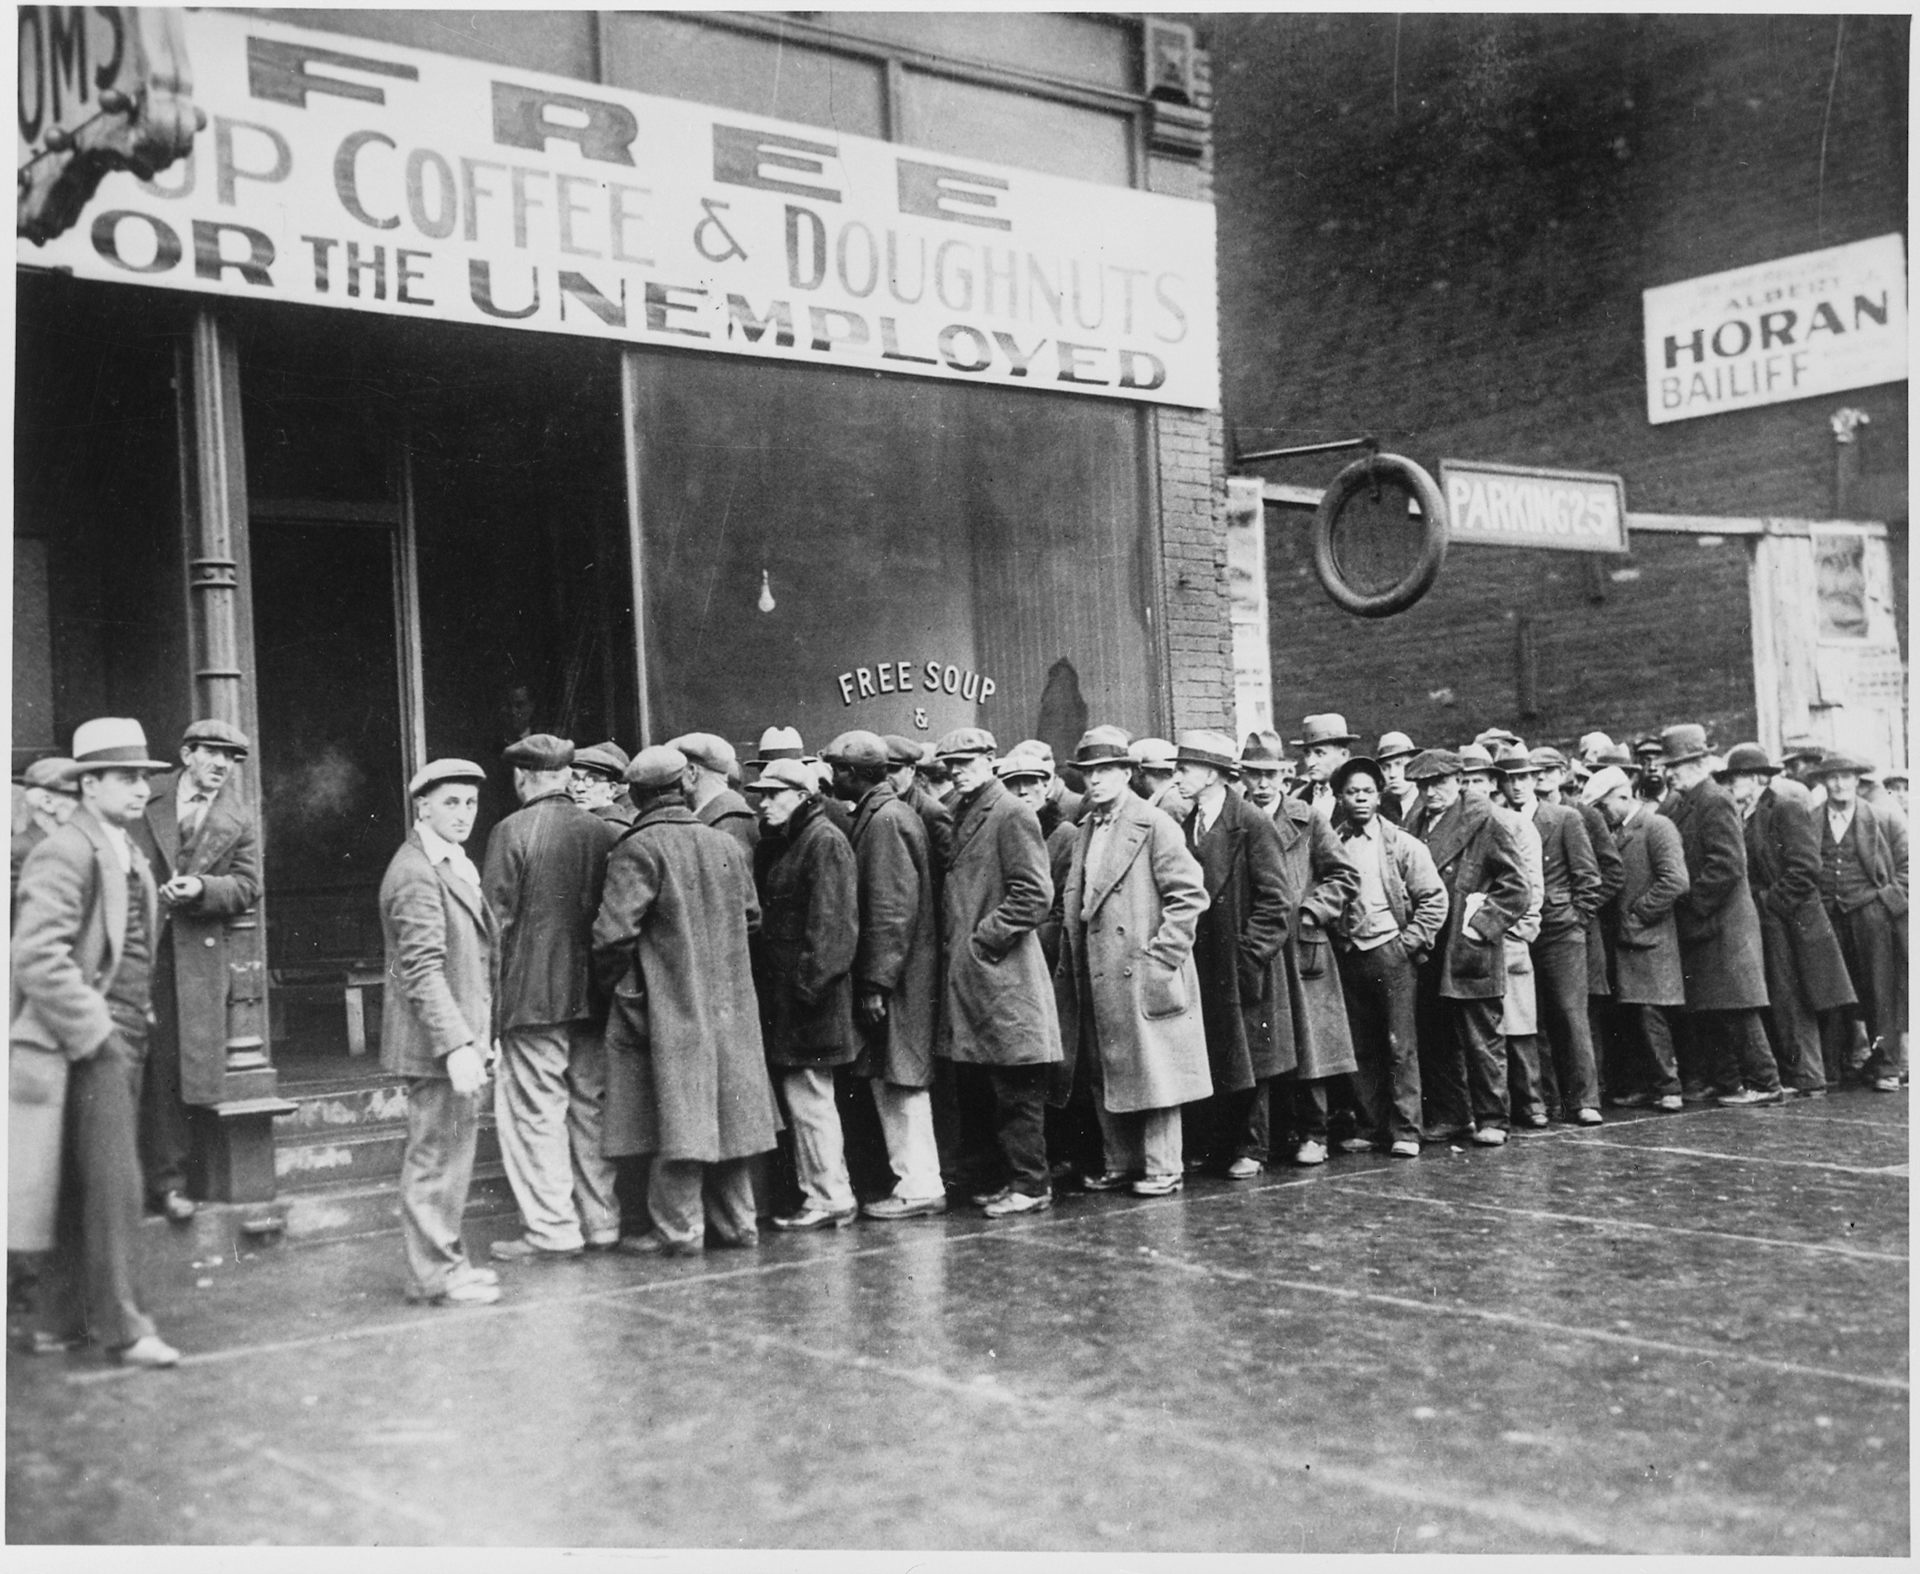 history of automation leading to unemployment